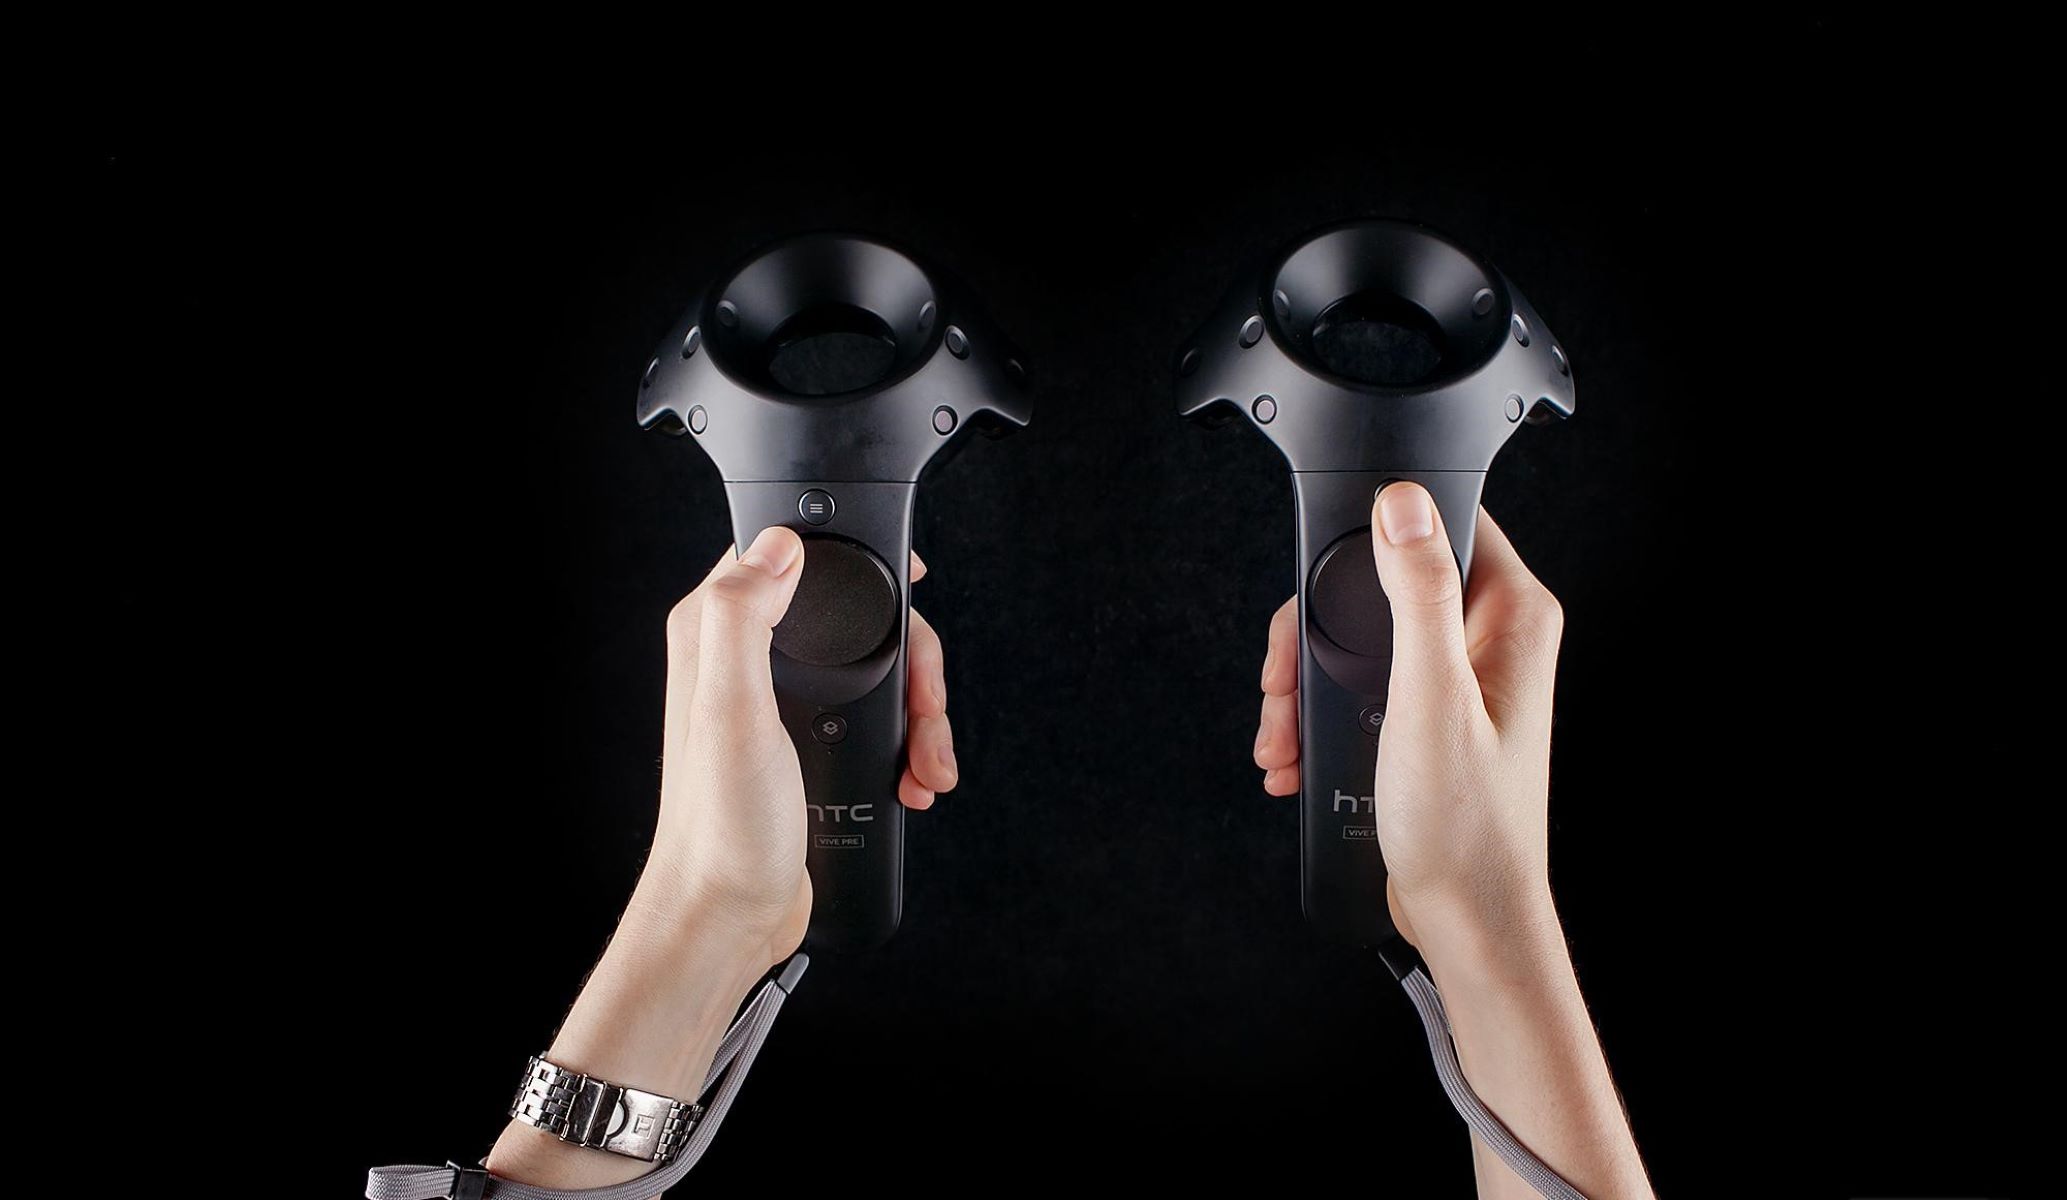 How To Make The HTC Vive Controllers Less Laggy